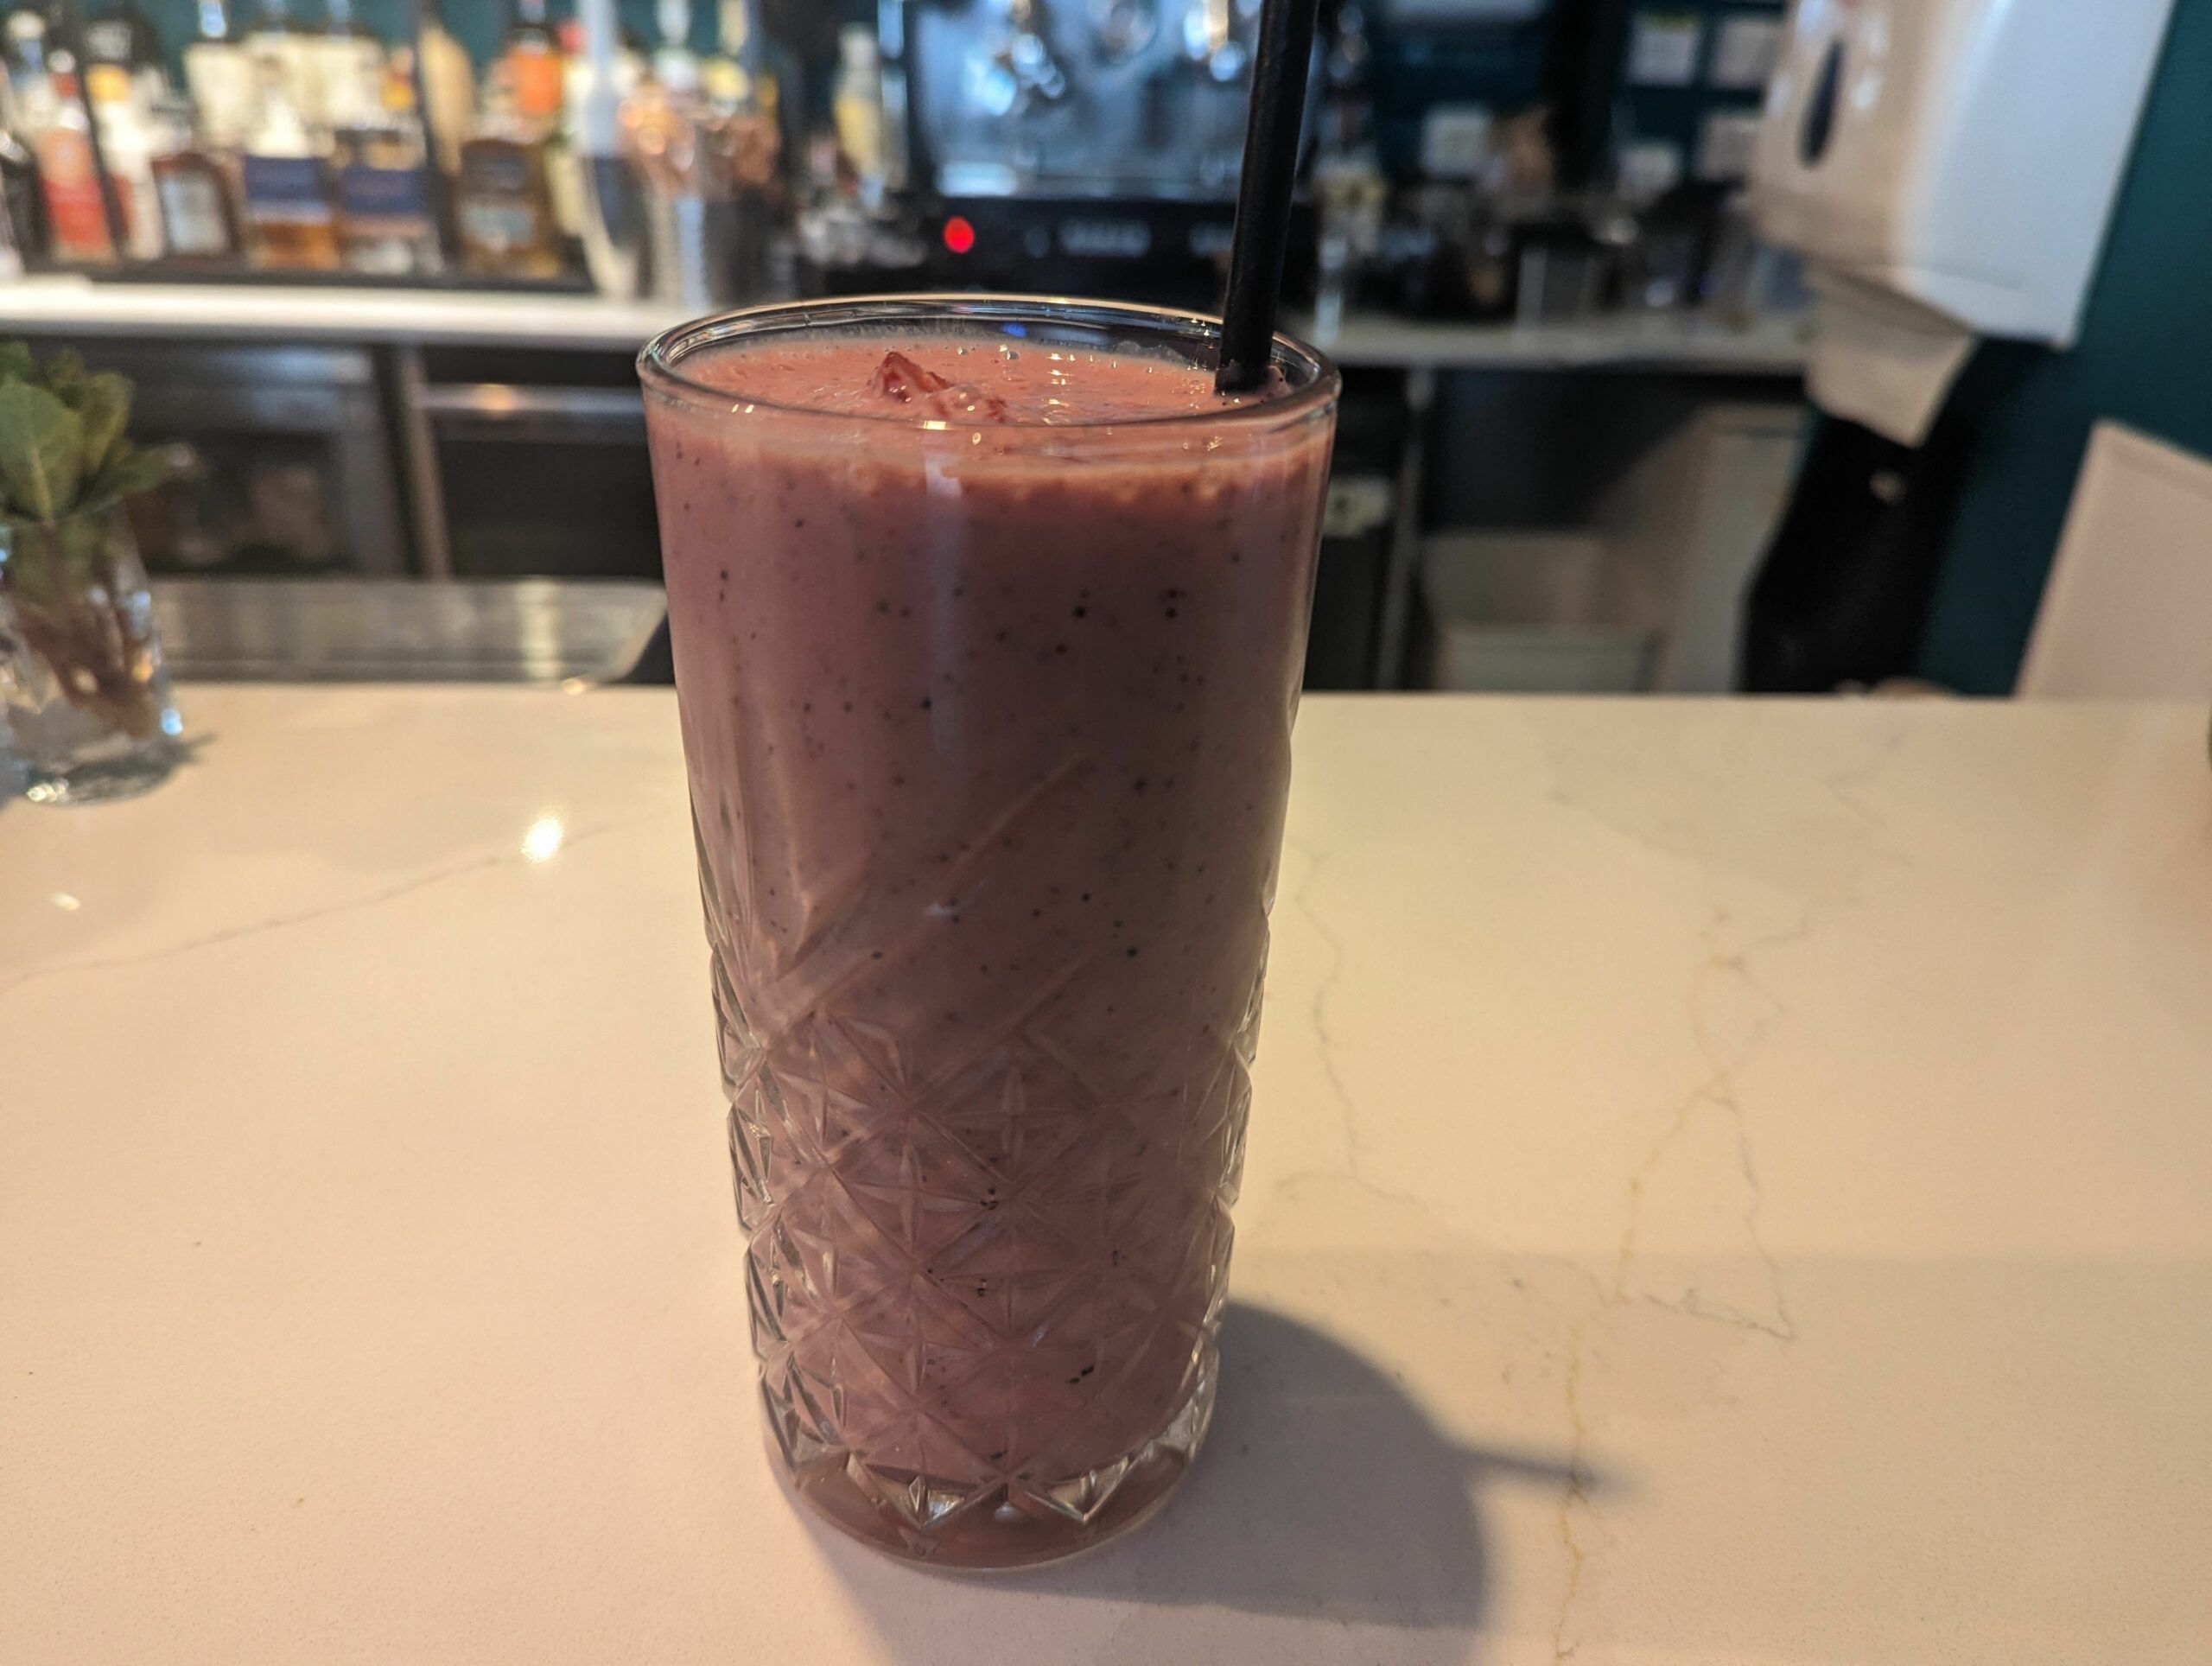 Bright pink strawberry smoothie made with fresh fruit. Brunch seven dials